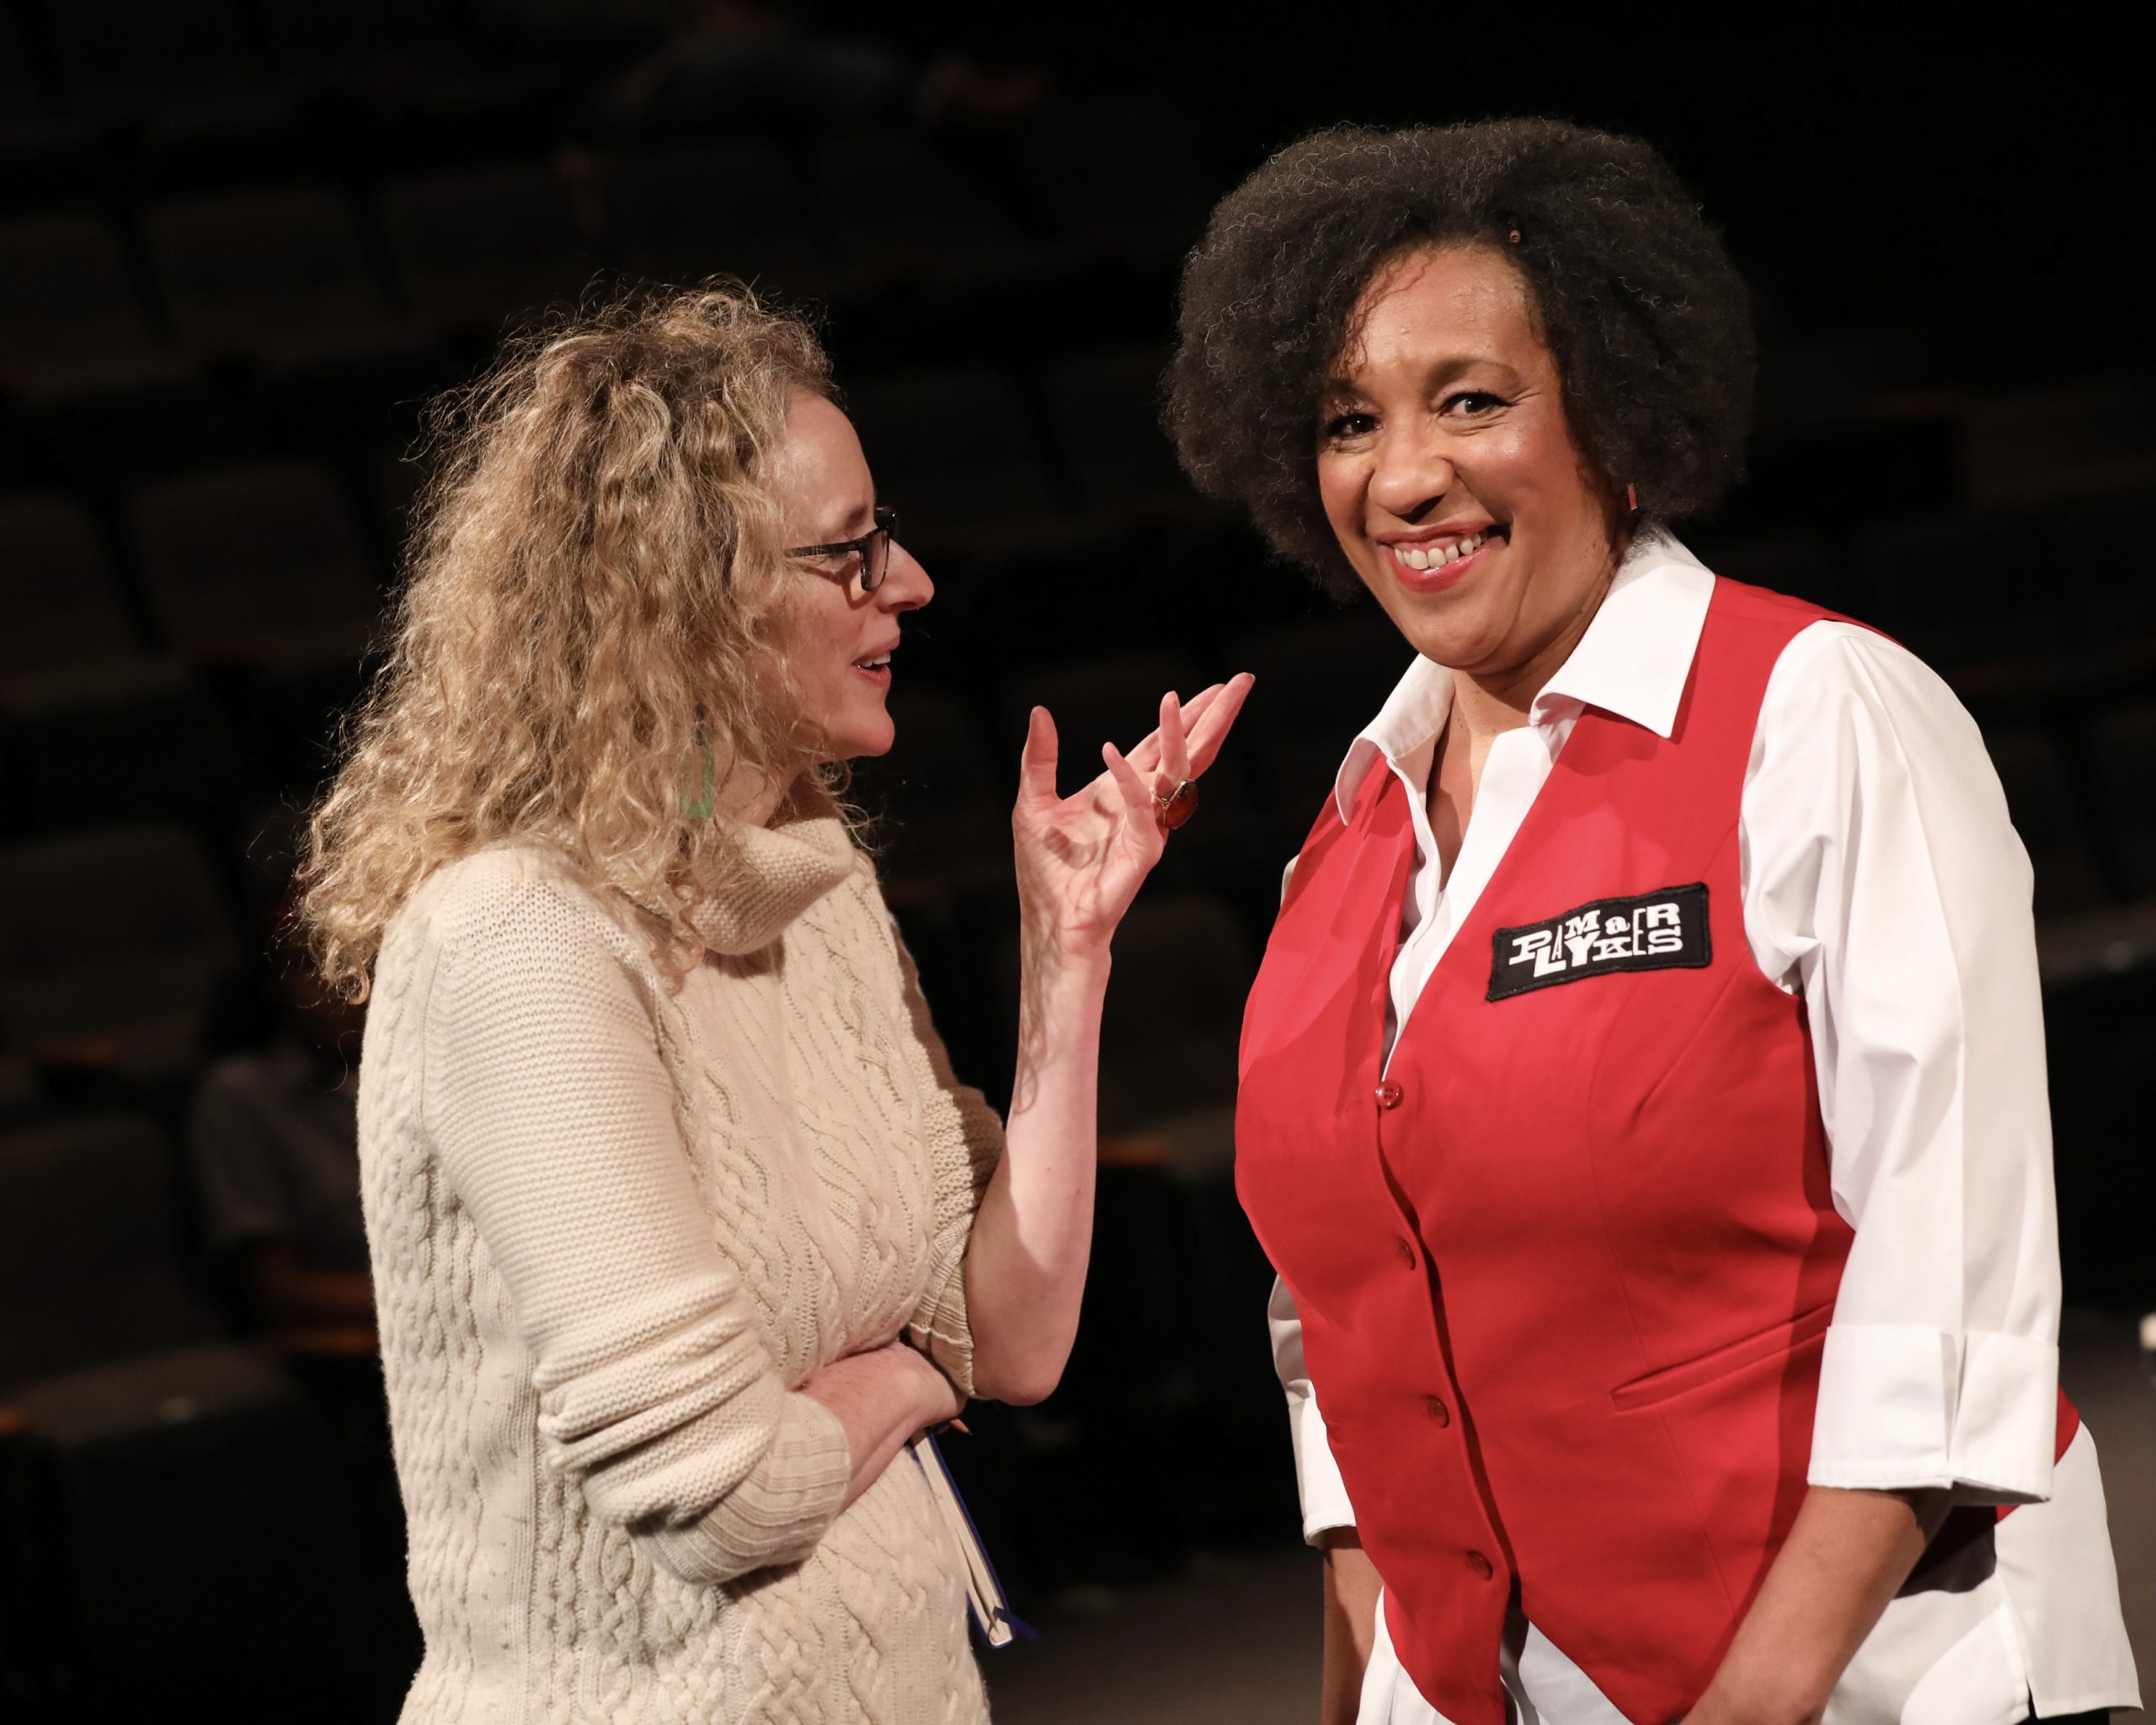 On the right, Kathy Williams, in costume as a PlayMakers usher, smiles directly at the camera. On the Left: Vivienne Benesch speaks with her.